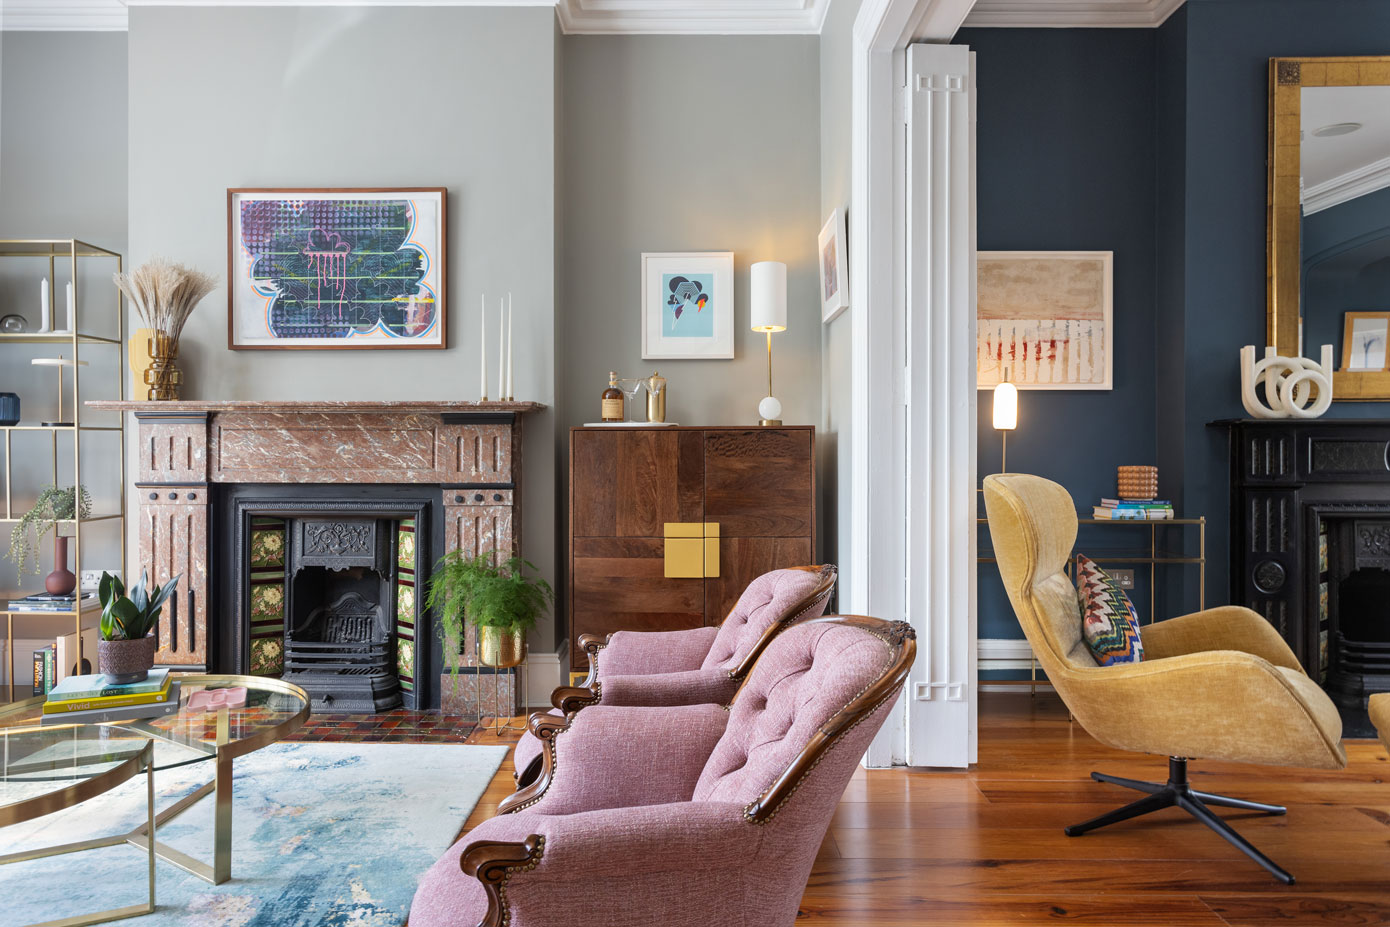 This Edwardian Home in Blackrock is Filled With Contemporary Art - The ...